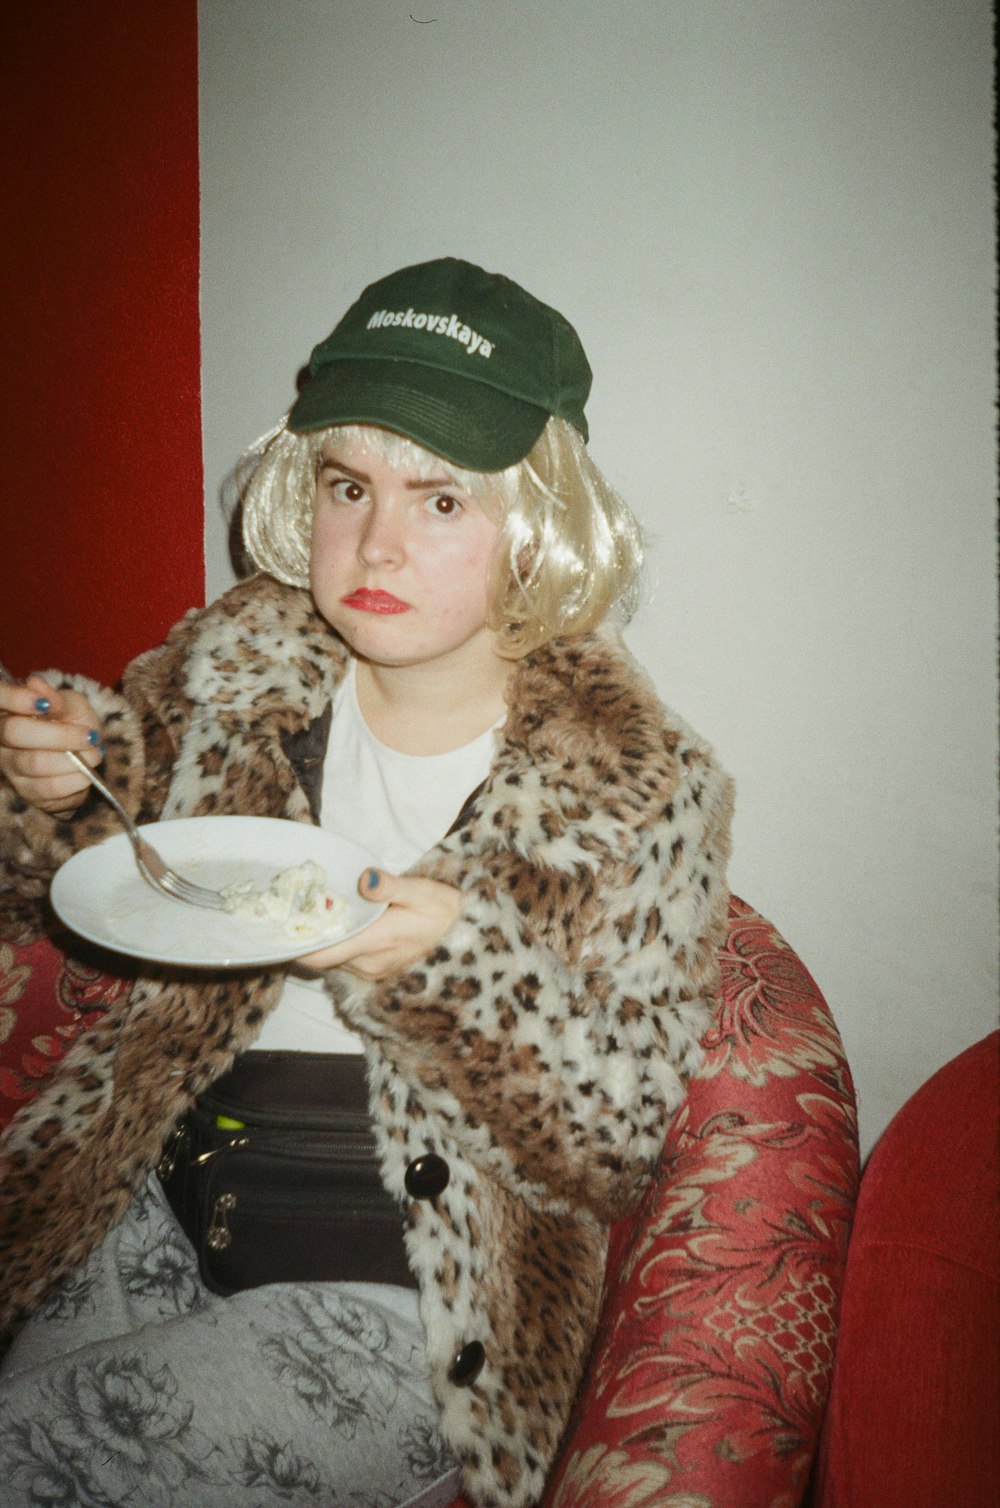 a person in a hat holding a plate of food